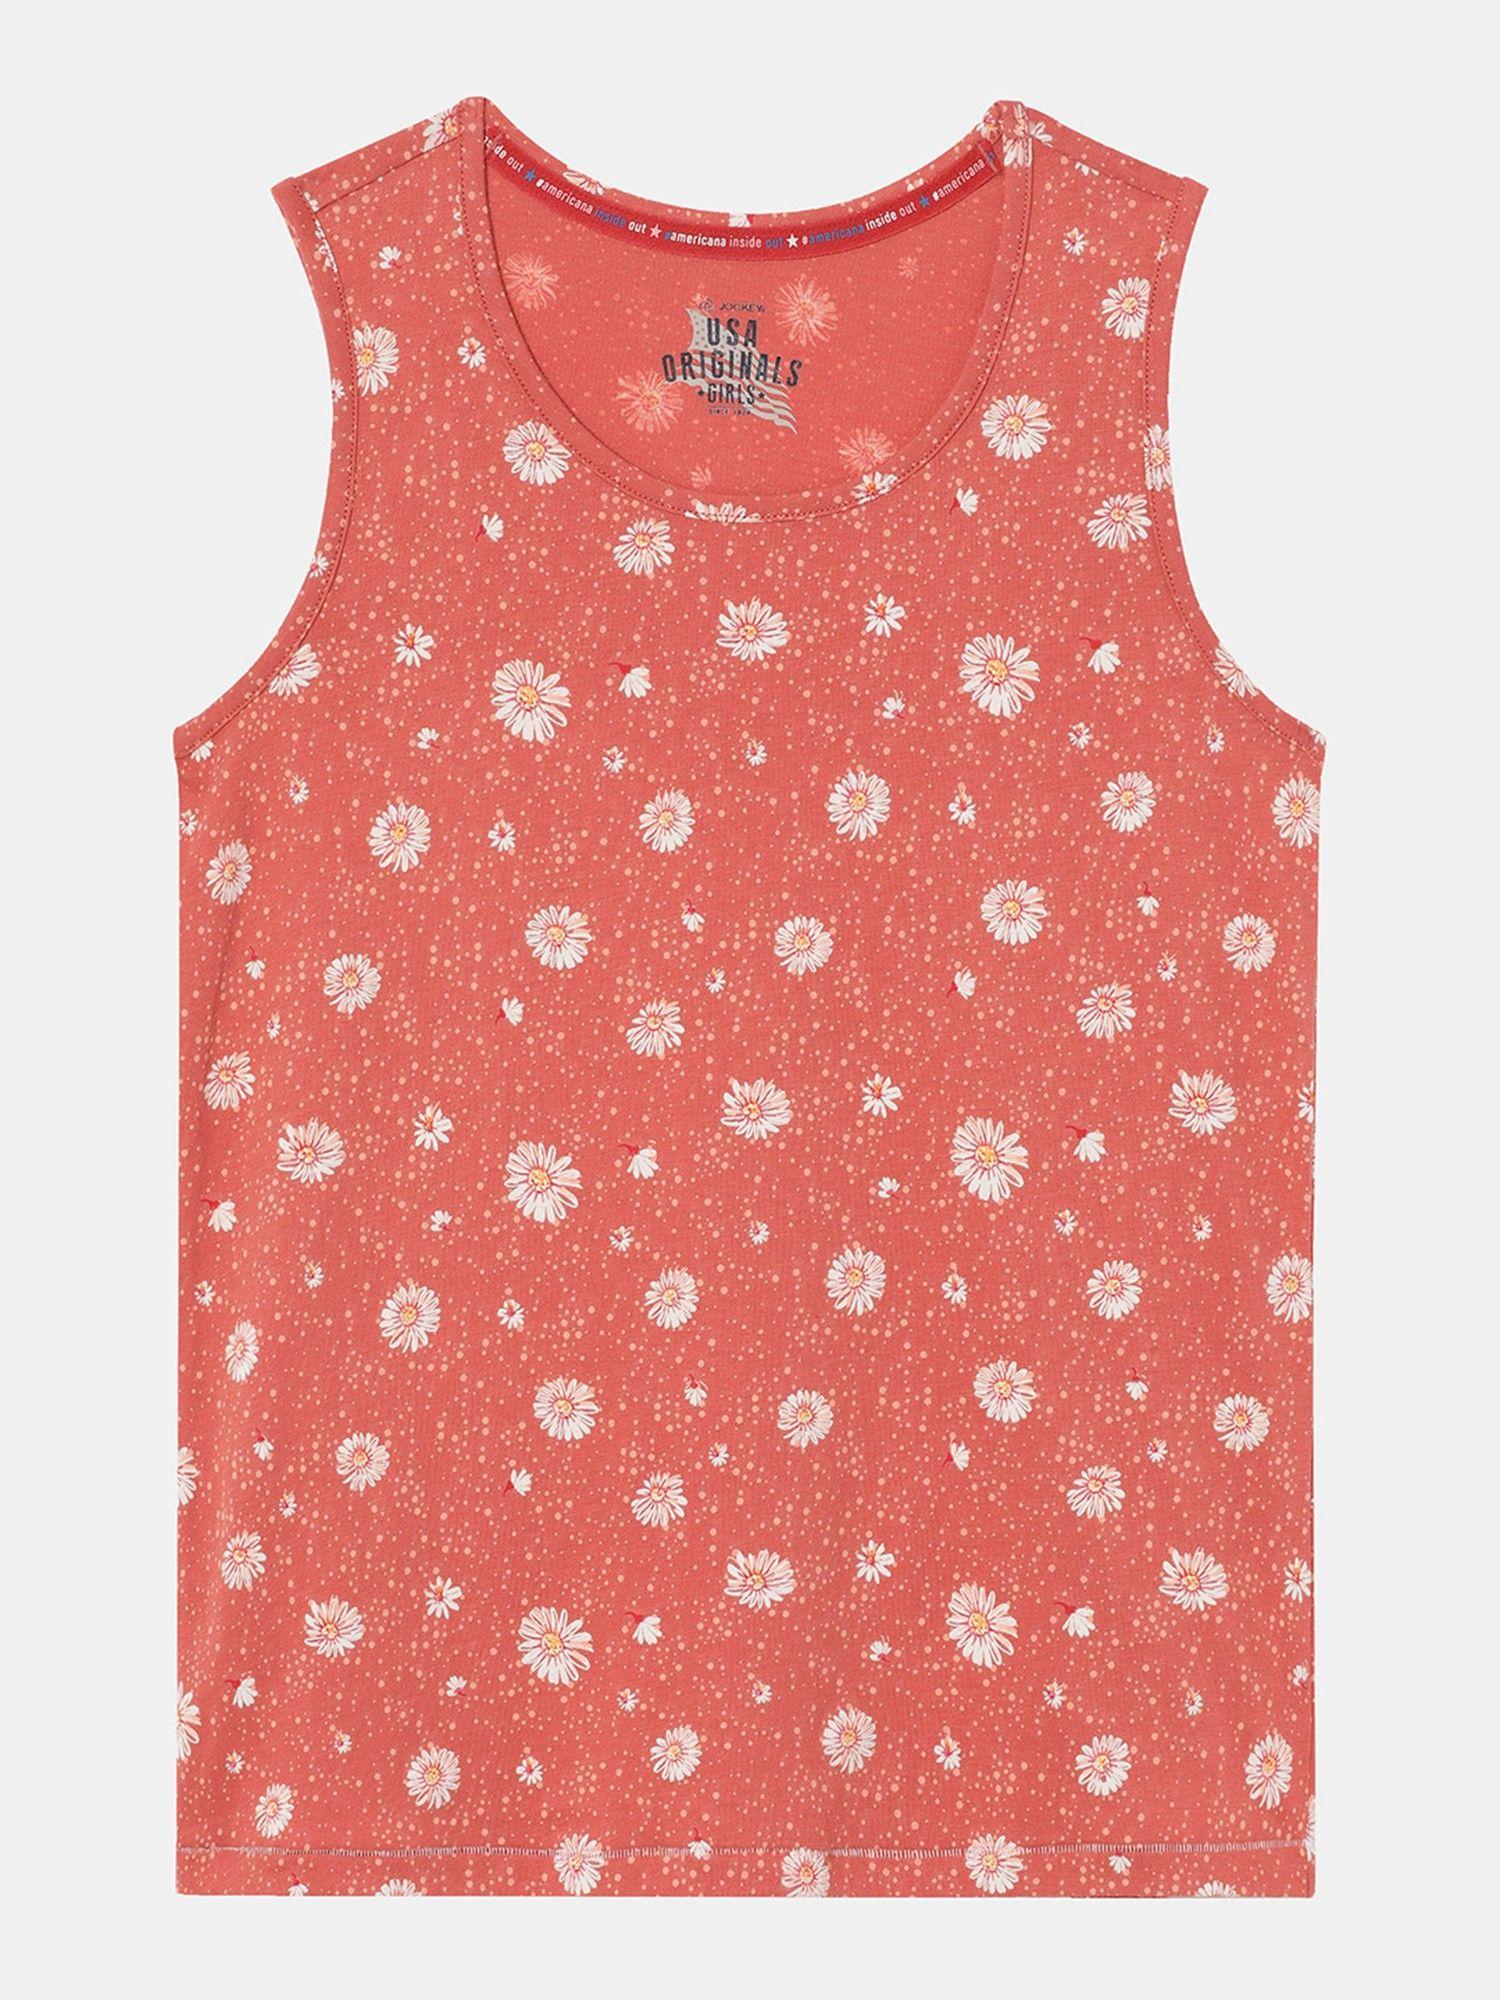 ug36 super combed cotton printed tank top - faded rose